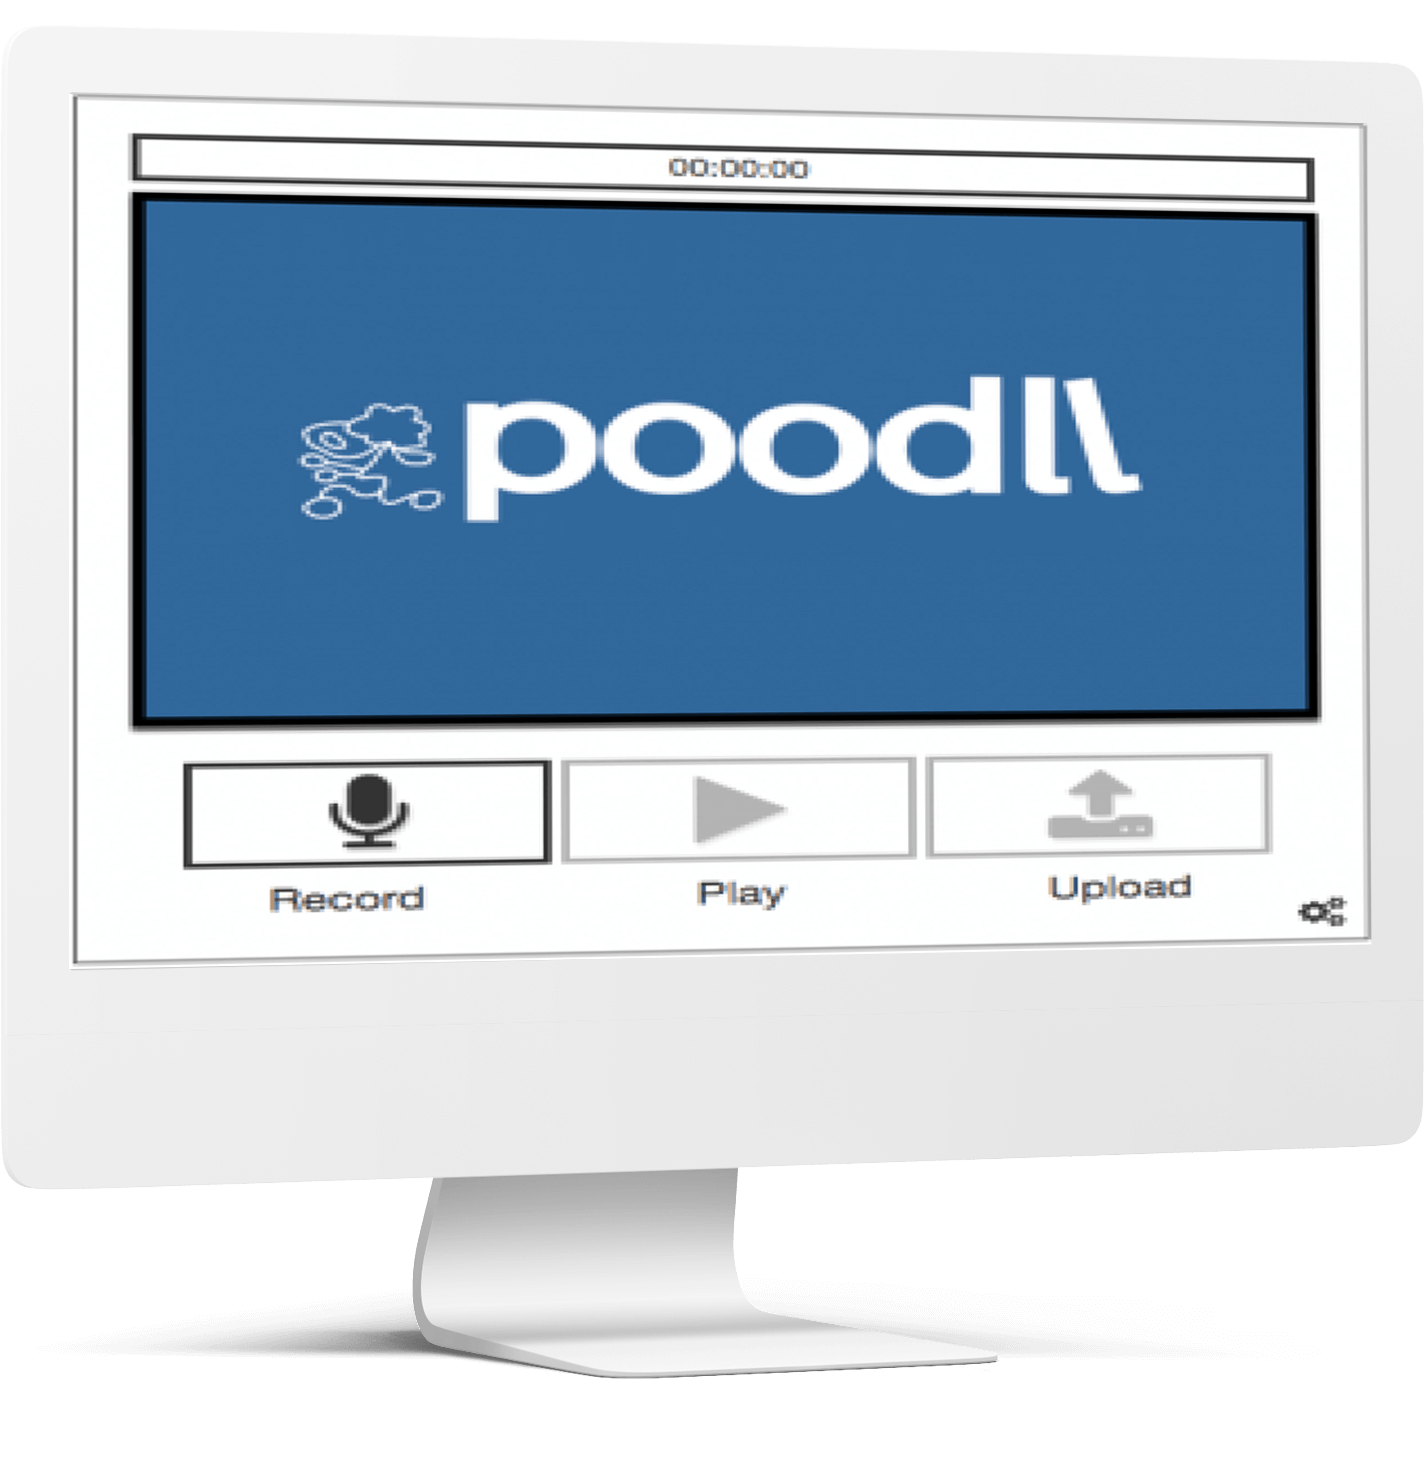 Poodll Brand Images